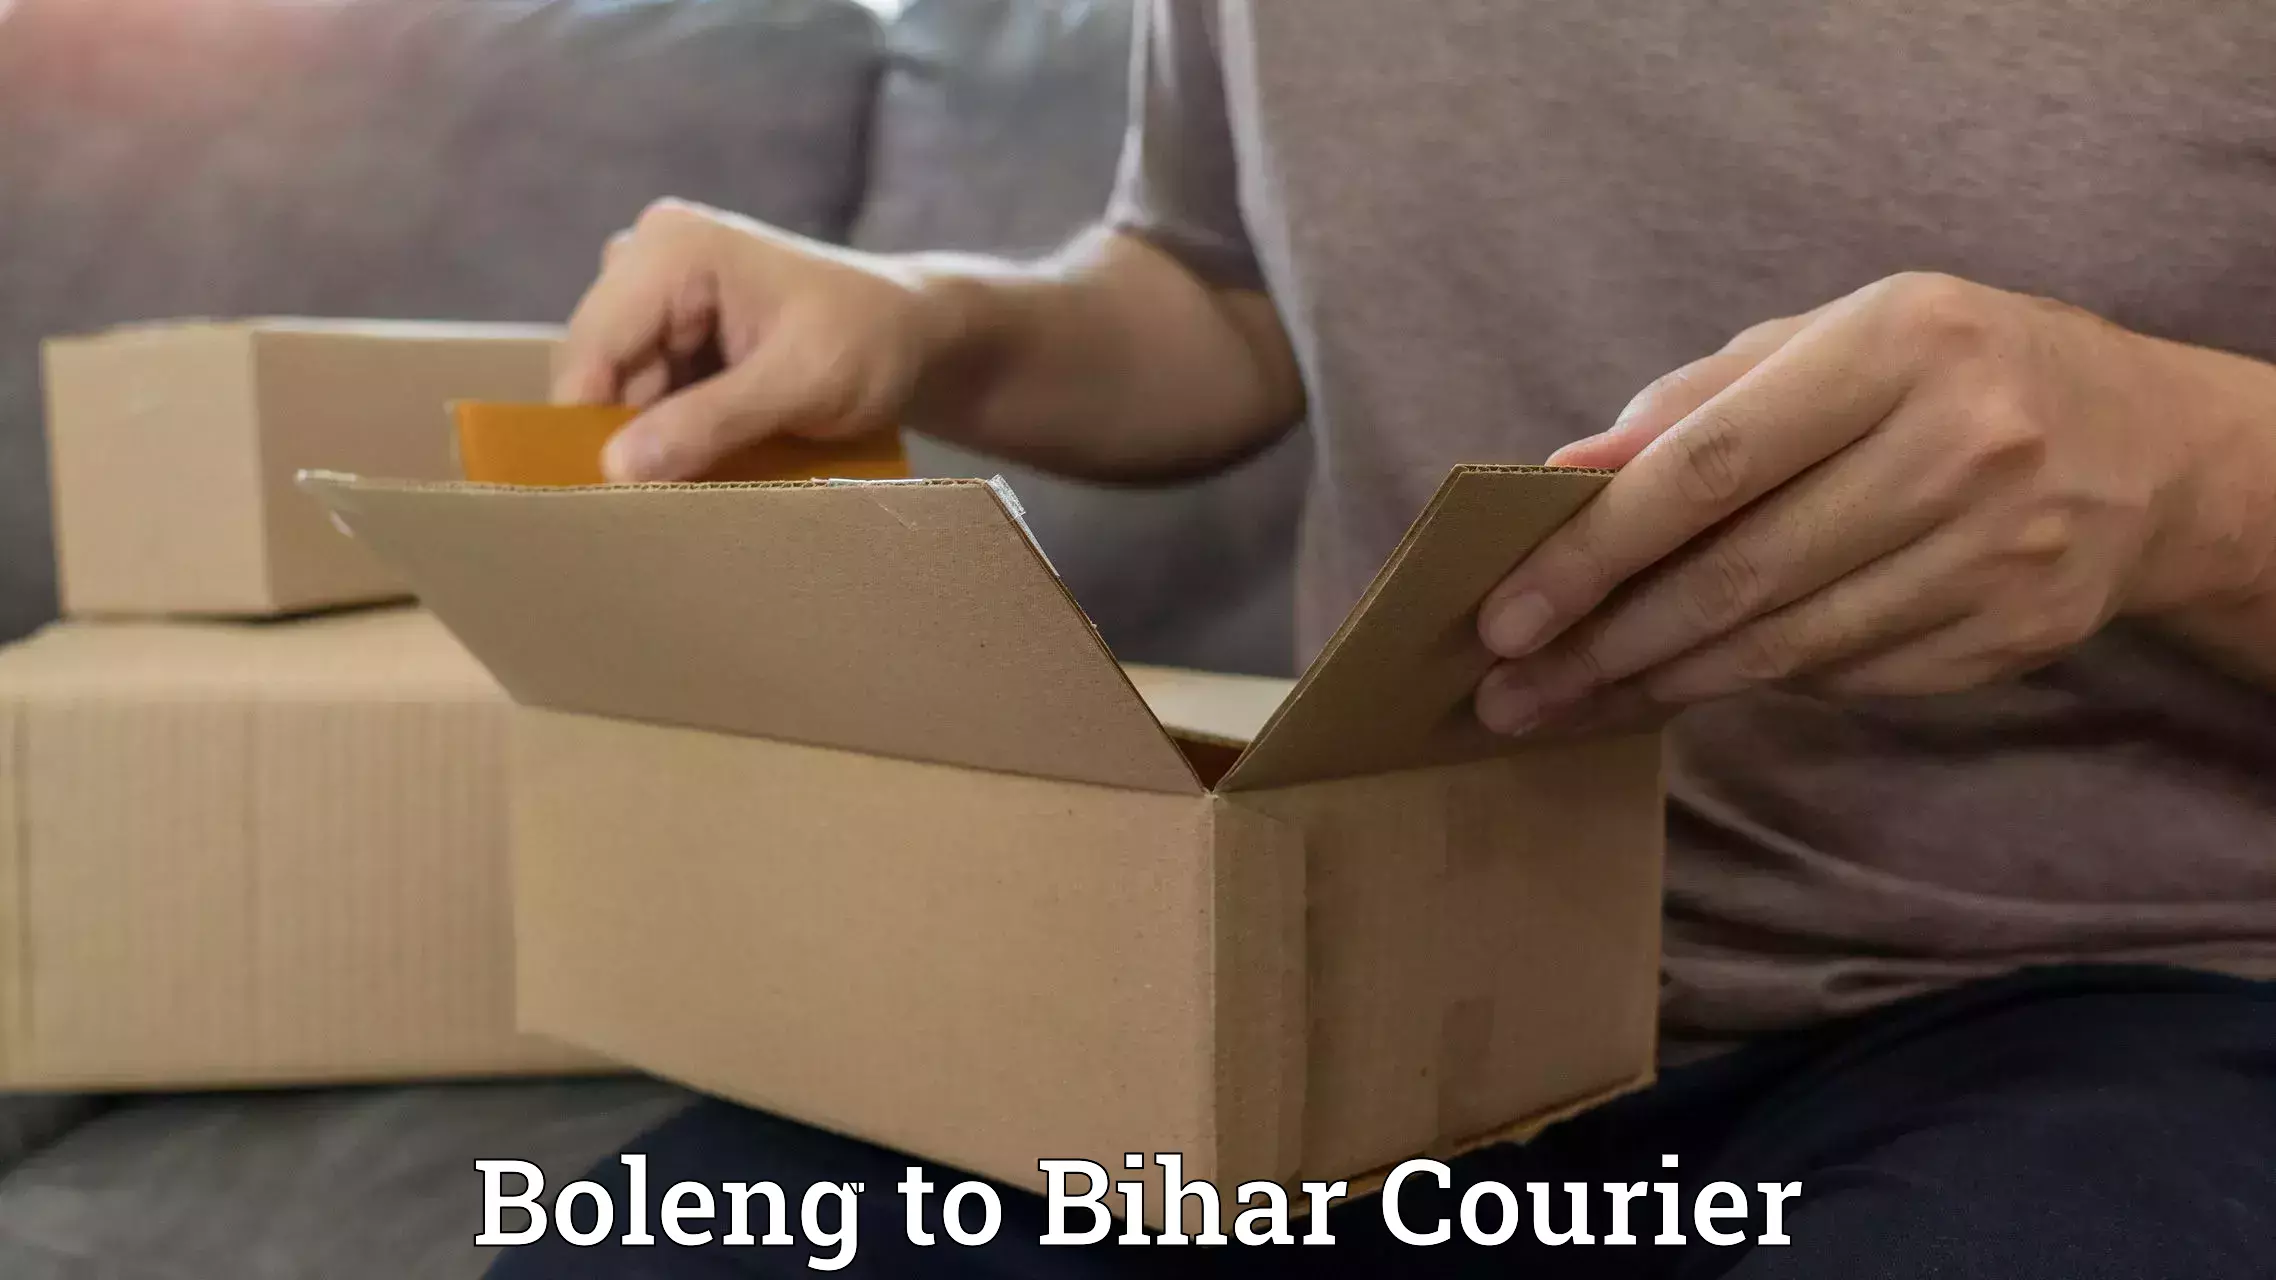 Fastest parcel delivery in Boleng to Bihar